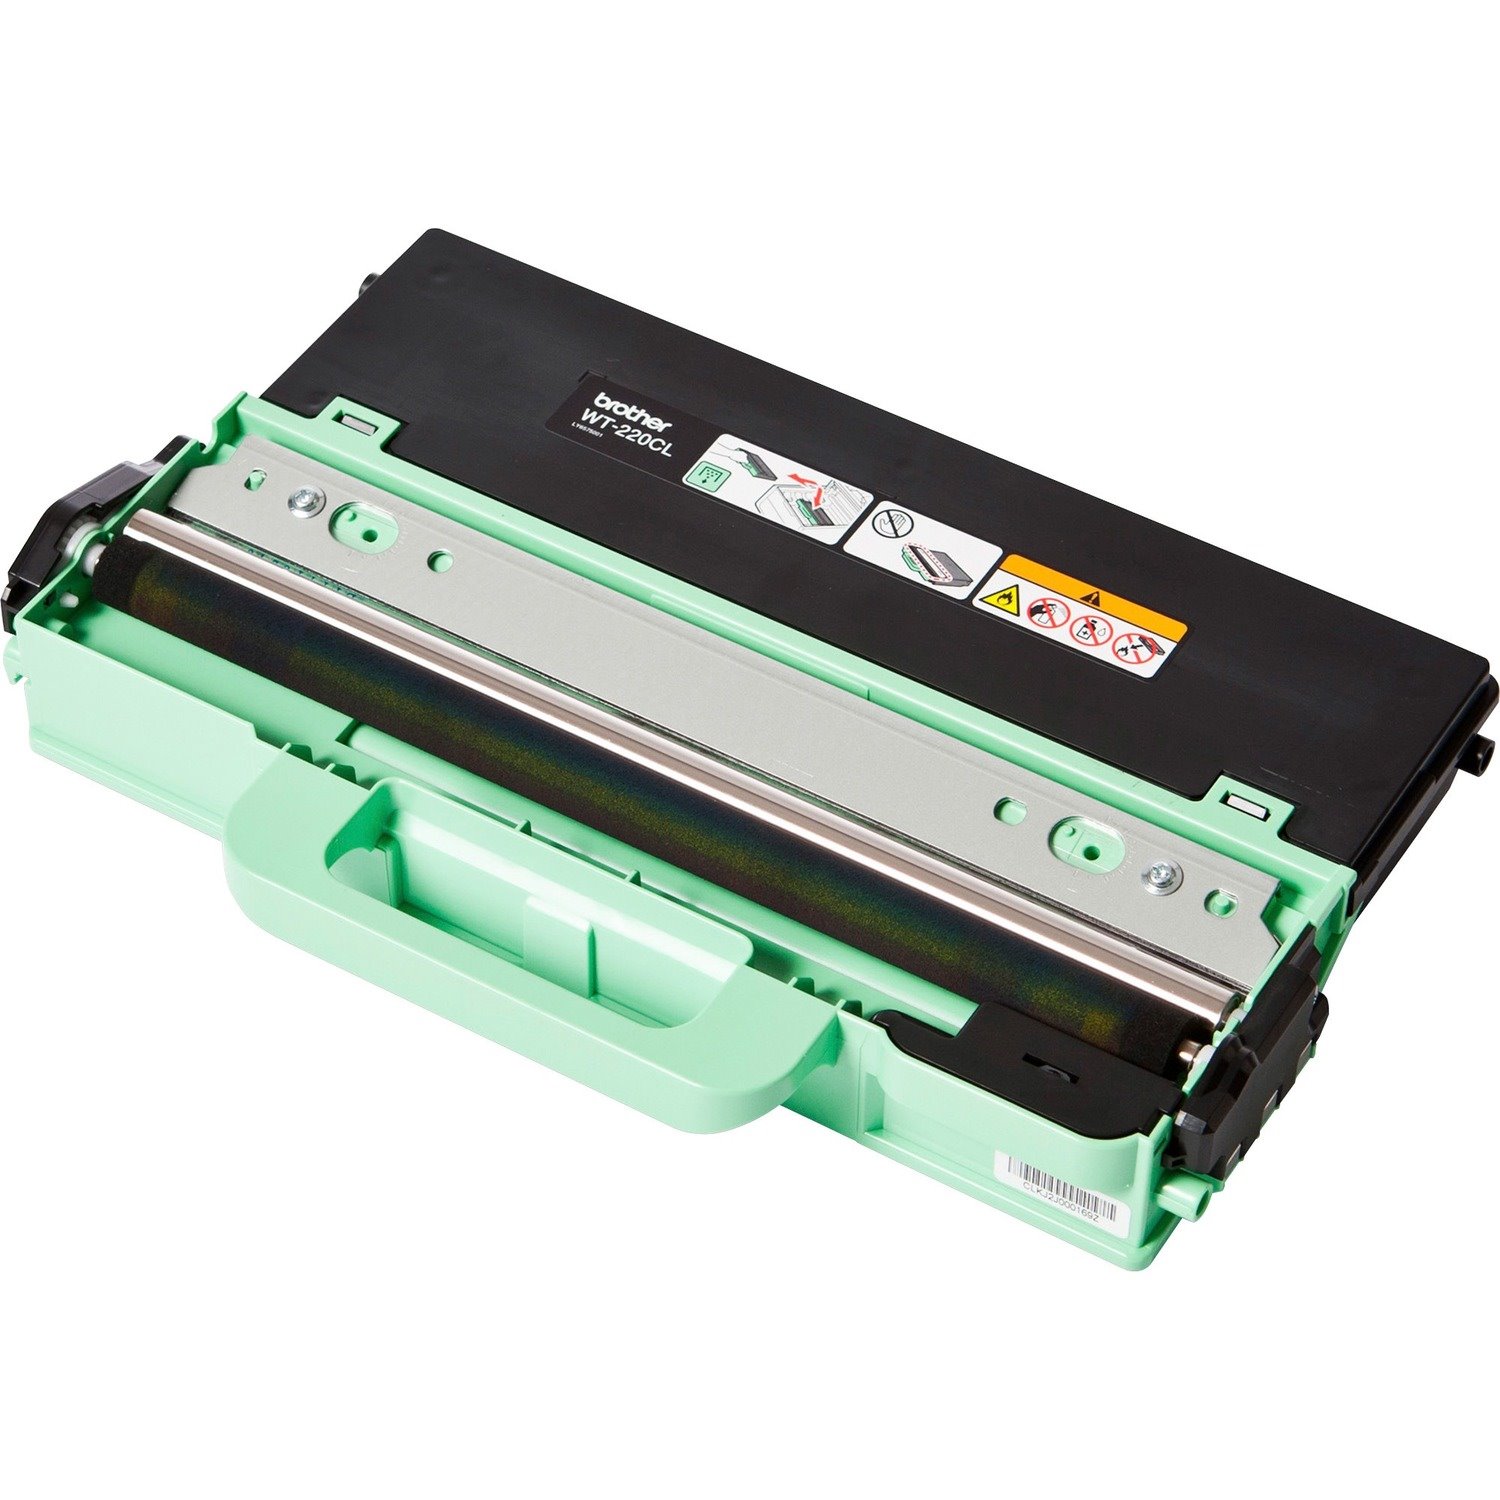 Brother WT220CL Waste Toner Cartridge